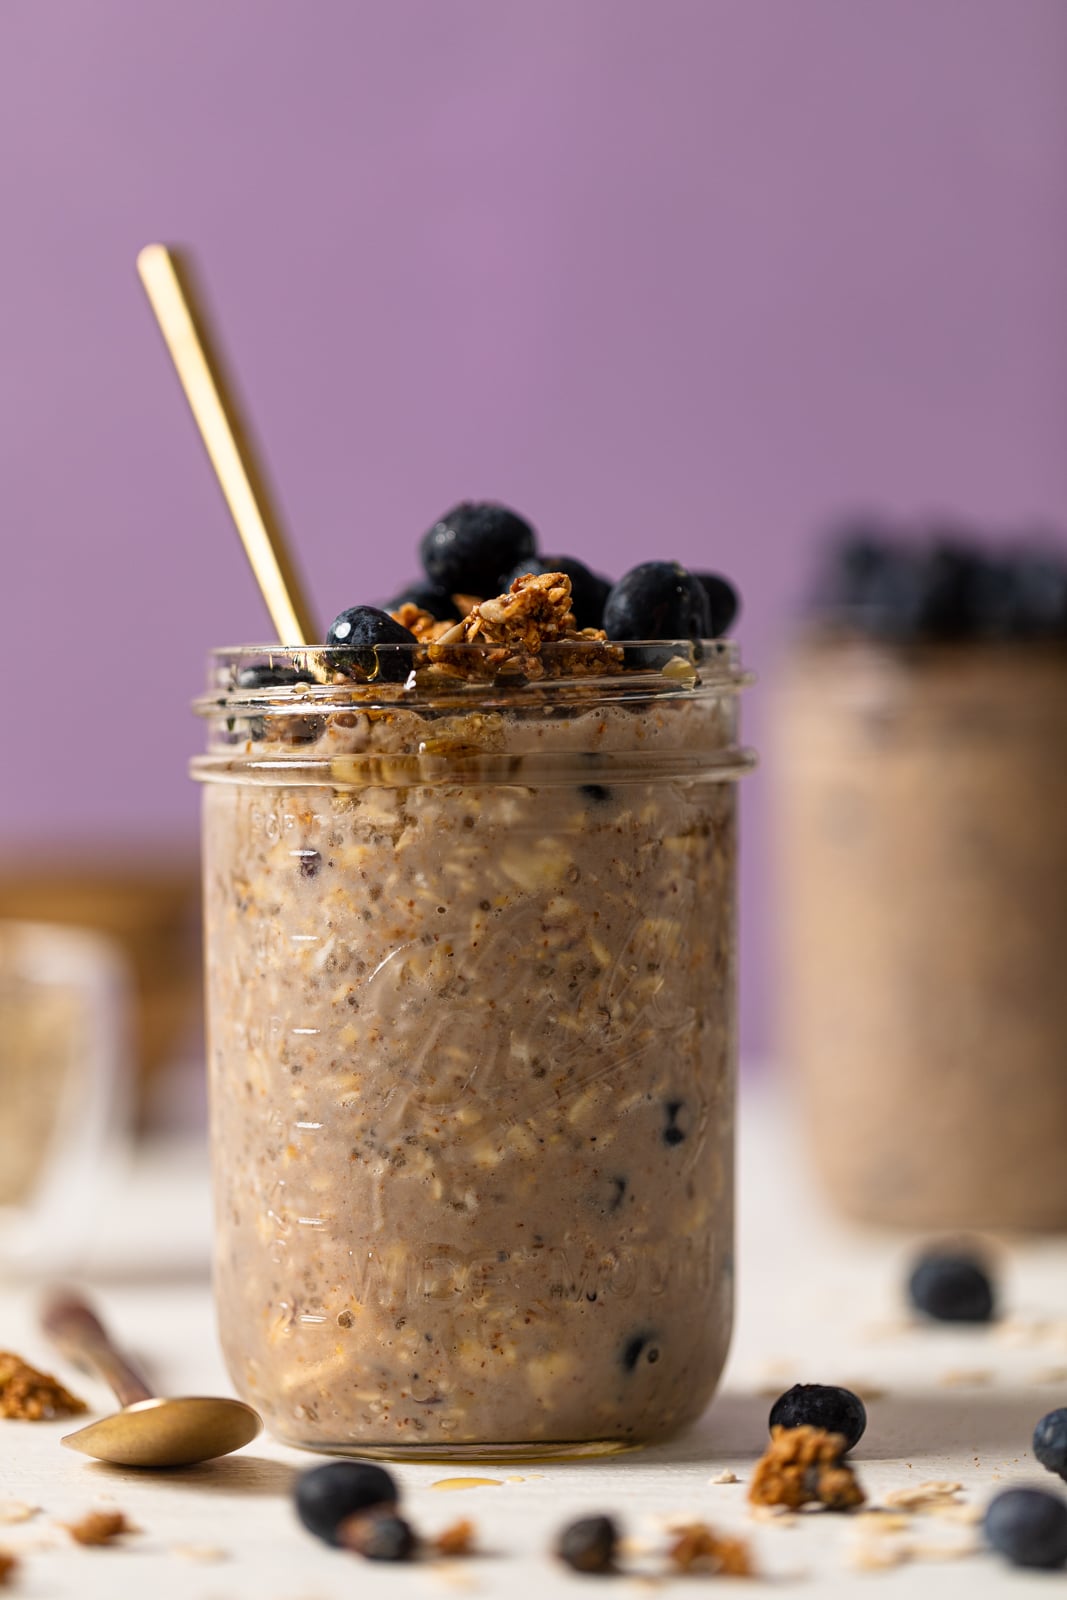 Berry Overnight Oats [Recipe] - The Lifestyle Dietitian